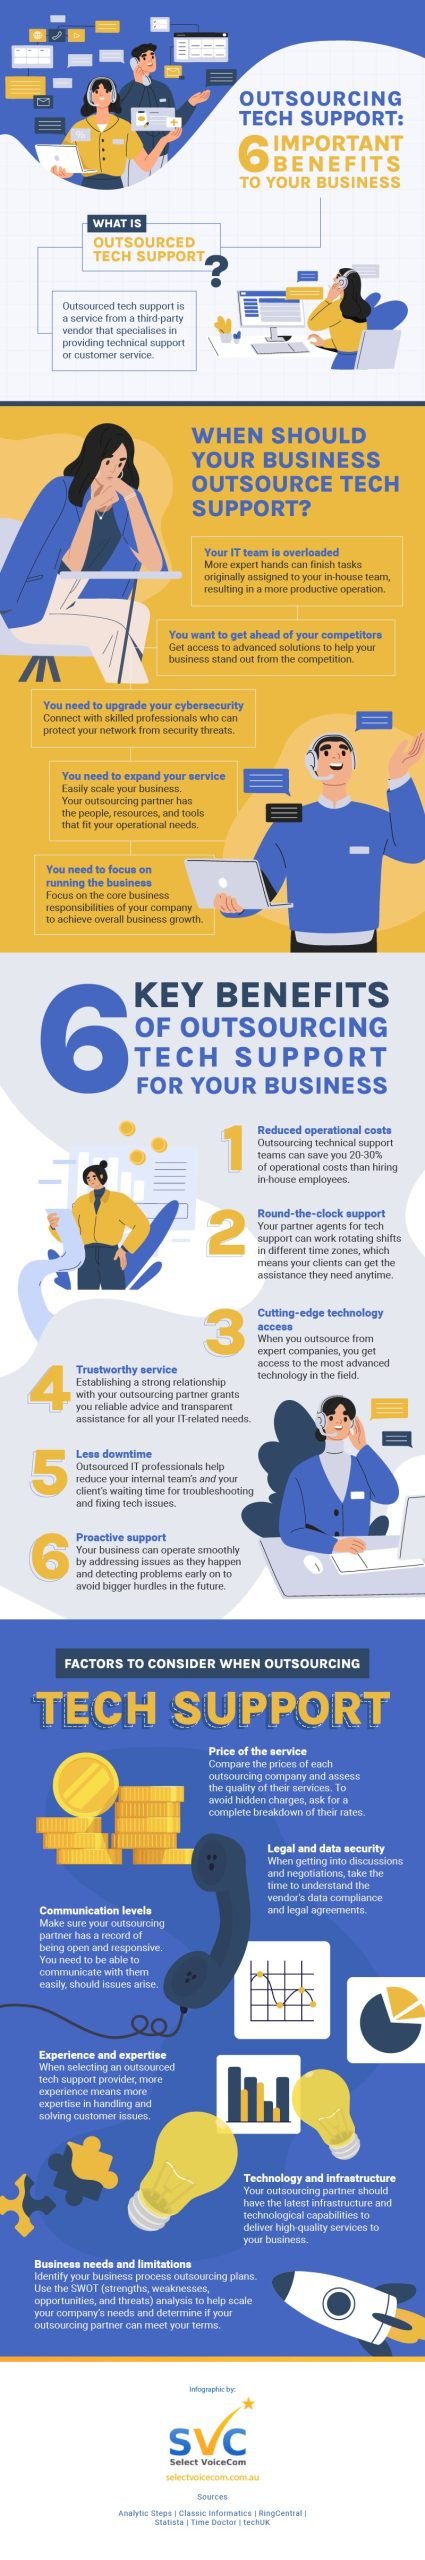 Outsourcing Tech Support - Important benefits to your business